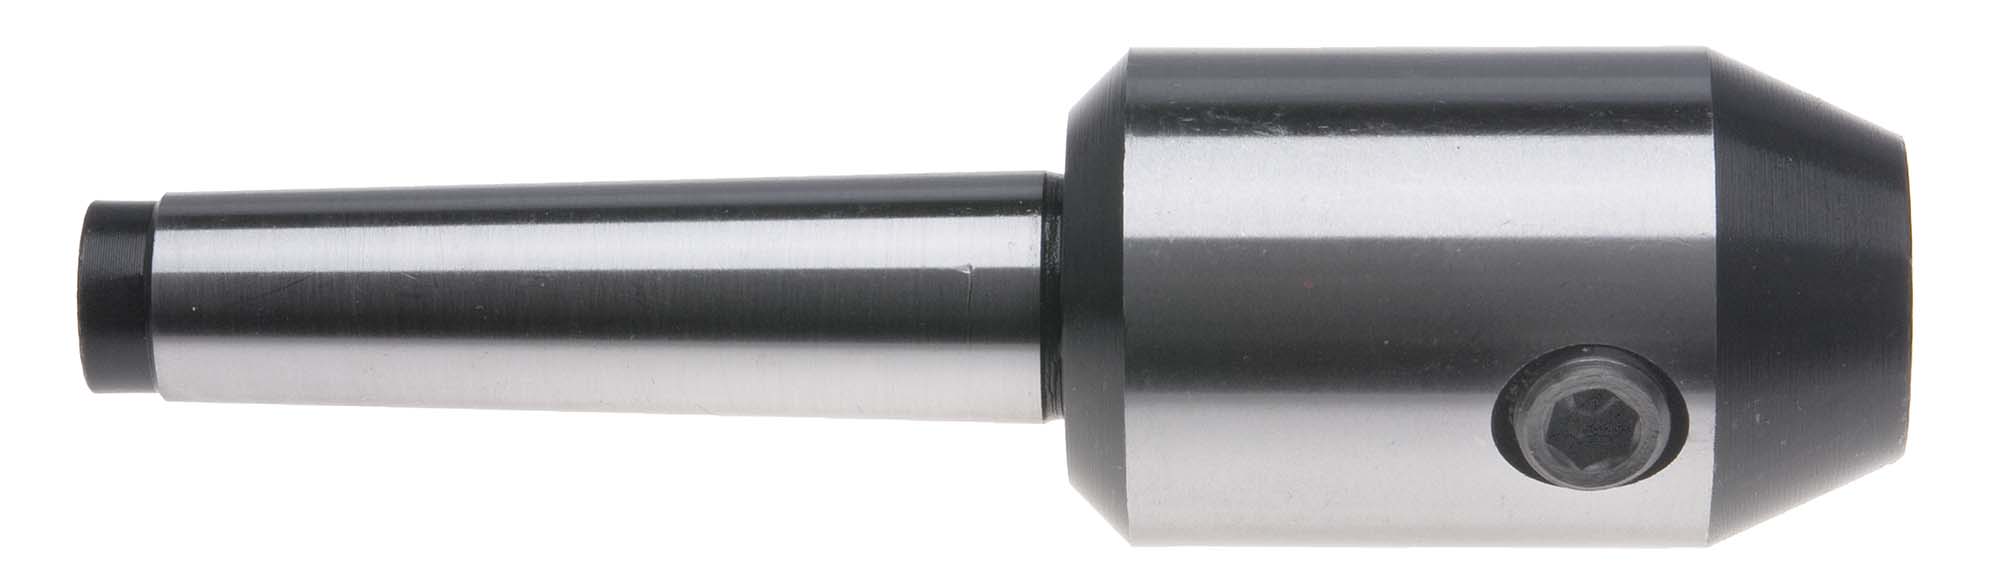 4 MT-3/4 End Mill Adapter with Drawbar End